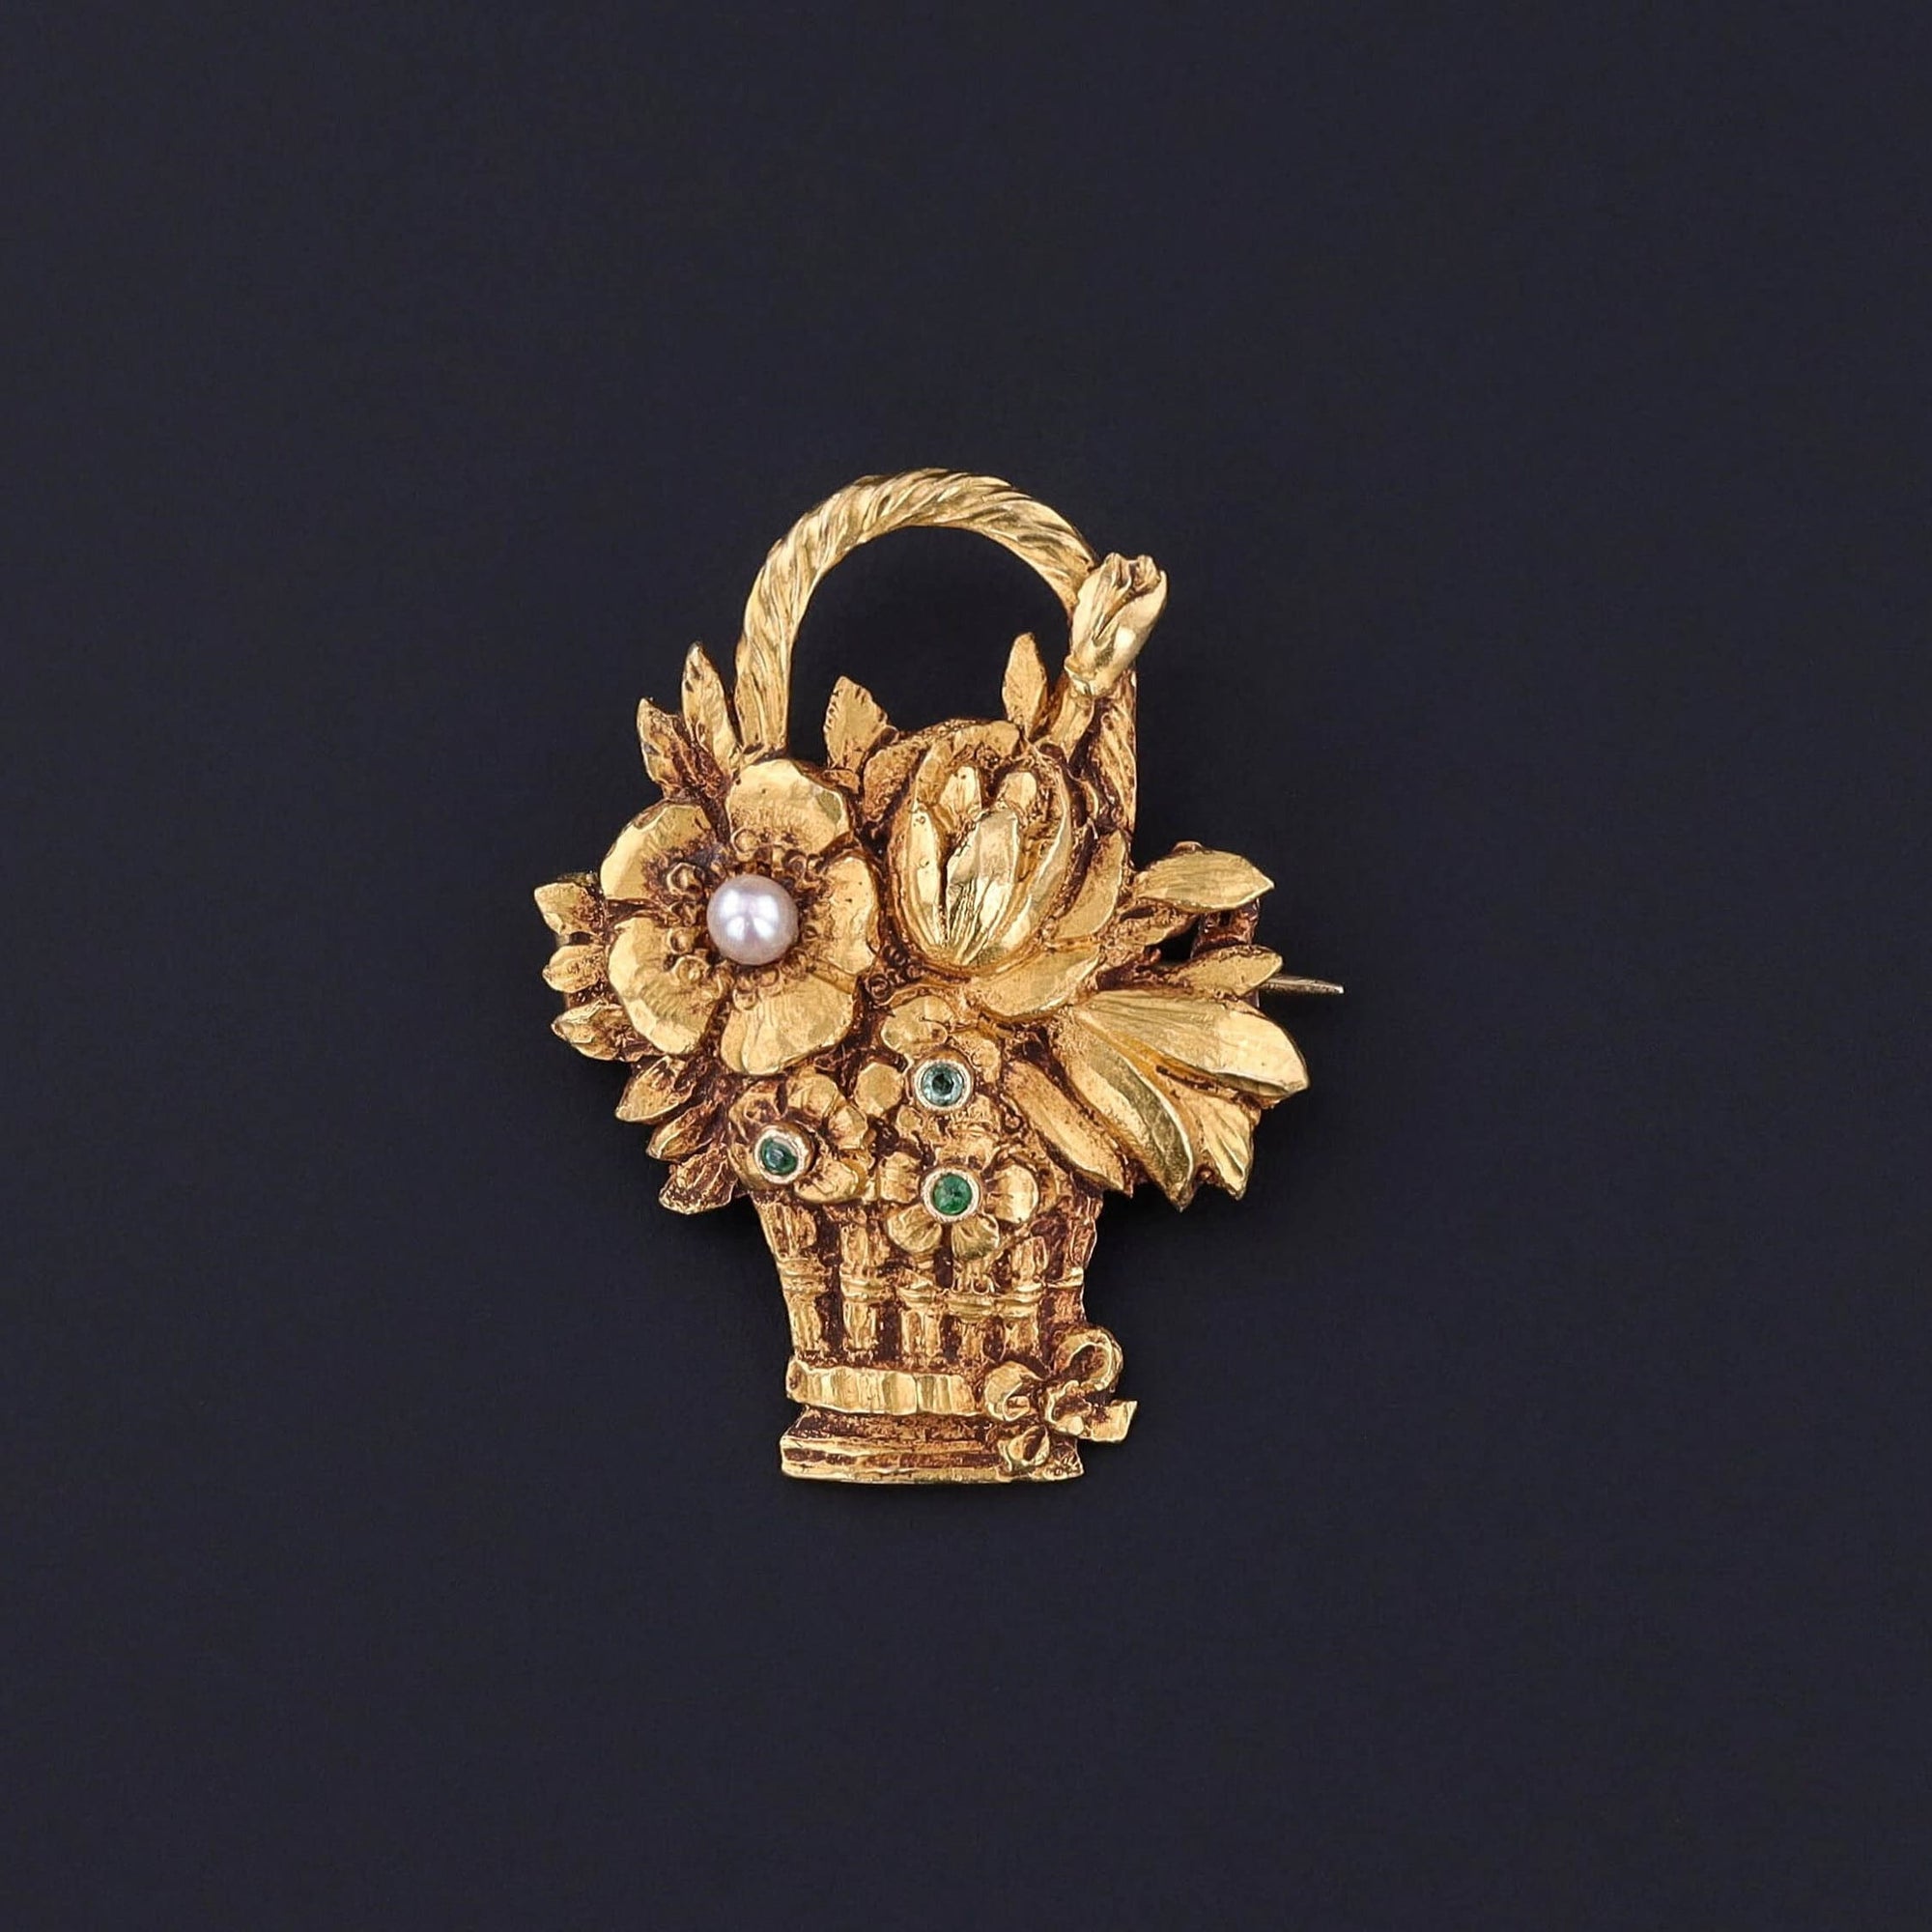 A Vintage Flower Basket Brooch: A finely rendered brooch of 14k gold showcasing a basket of blooms adorned with emeralds and a pearl accent. The brooch is in great condition and would be perfect for any jewelry collector.